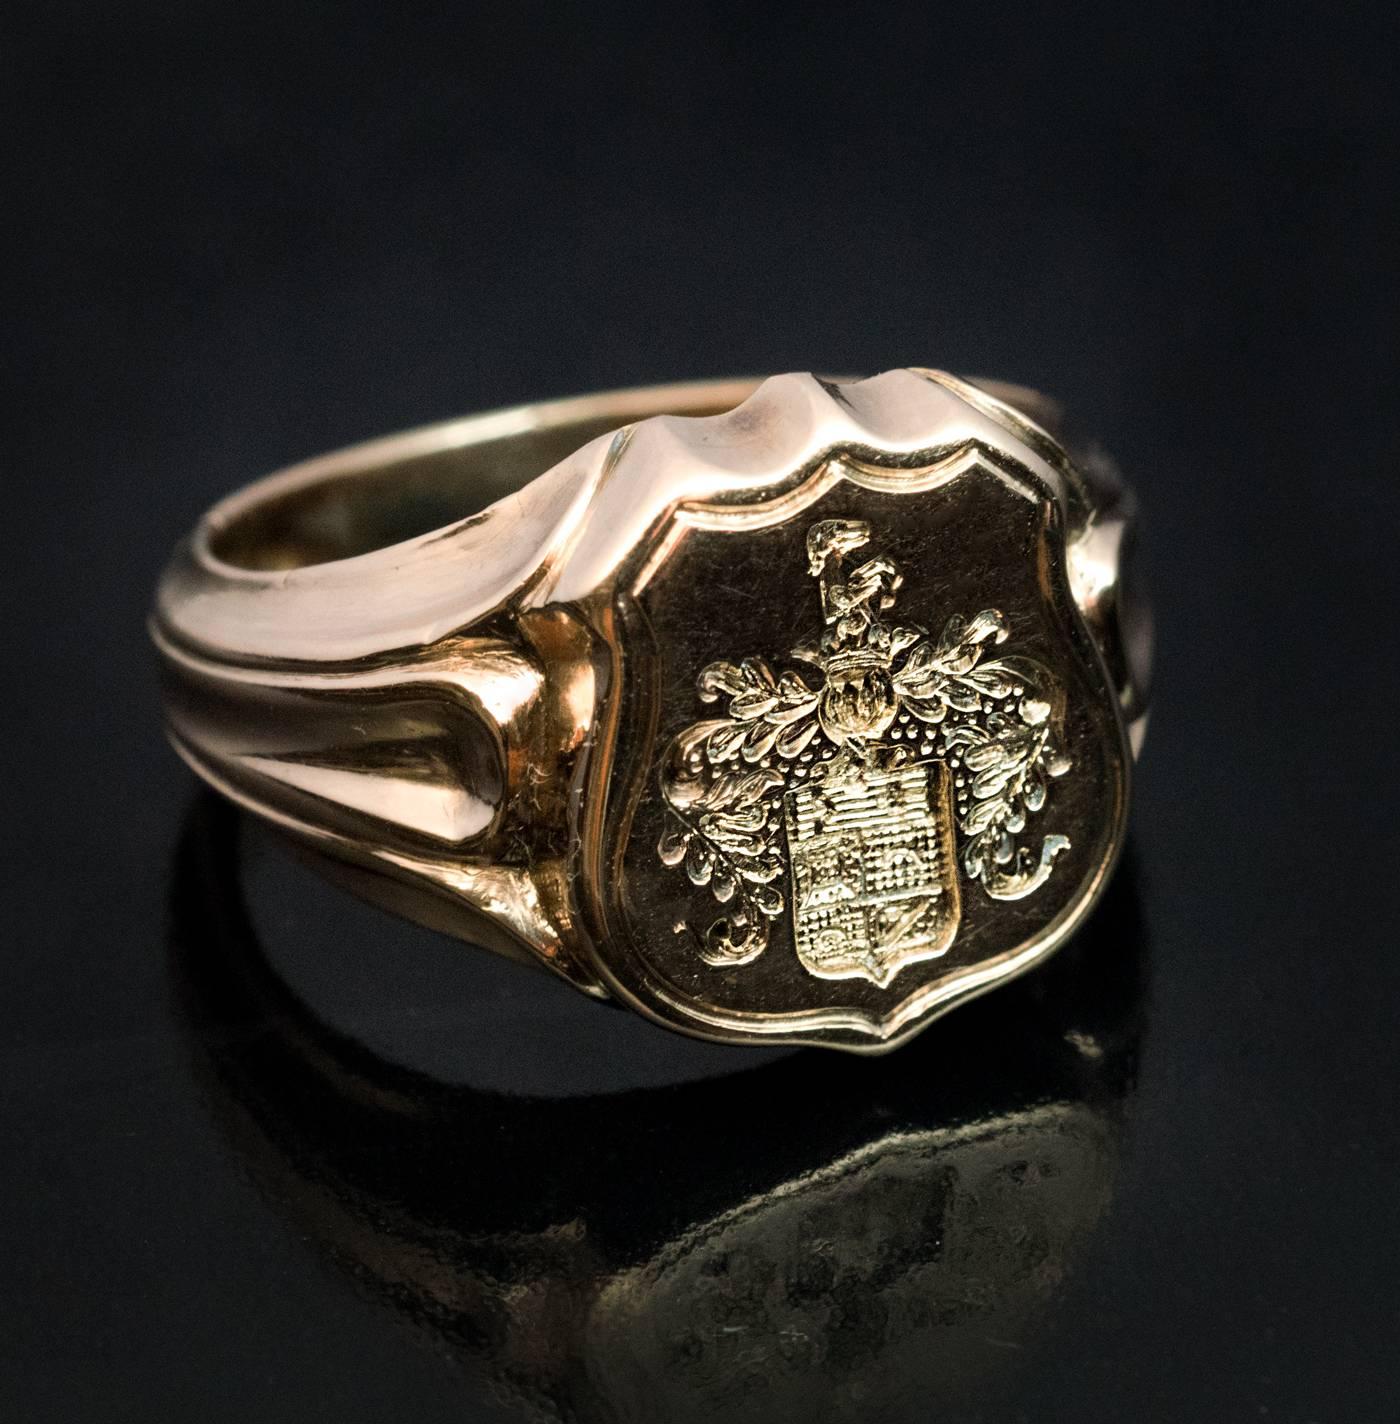 Made in St. Petersburg in the 1870s
This antique Russian 14K gold men’s armorial seal ring features a finely carved noble coat of arms. The highly unusual element of the armorial is a profile figure of a hunting dog placed over the crown of